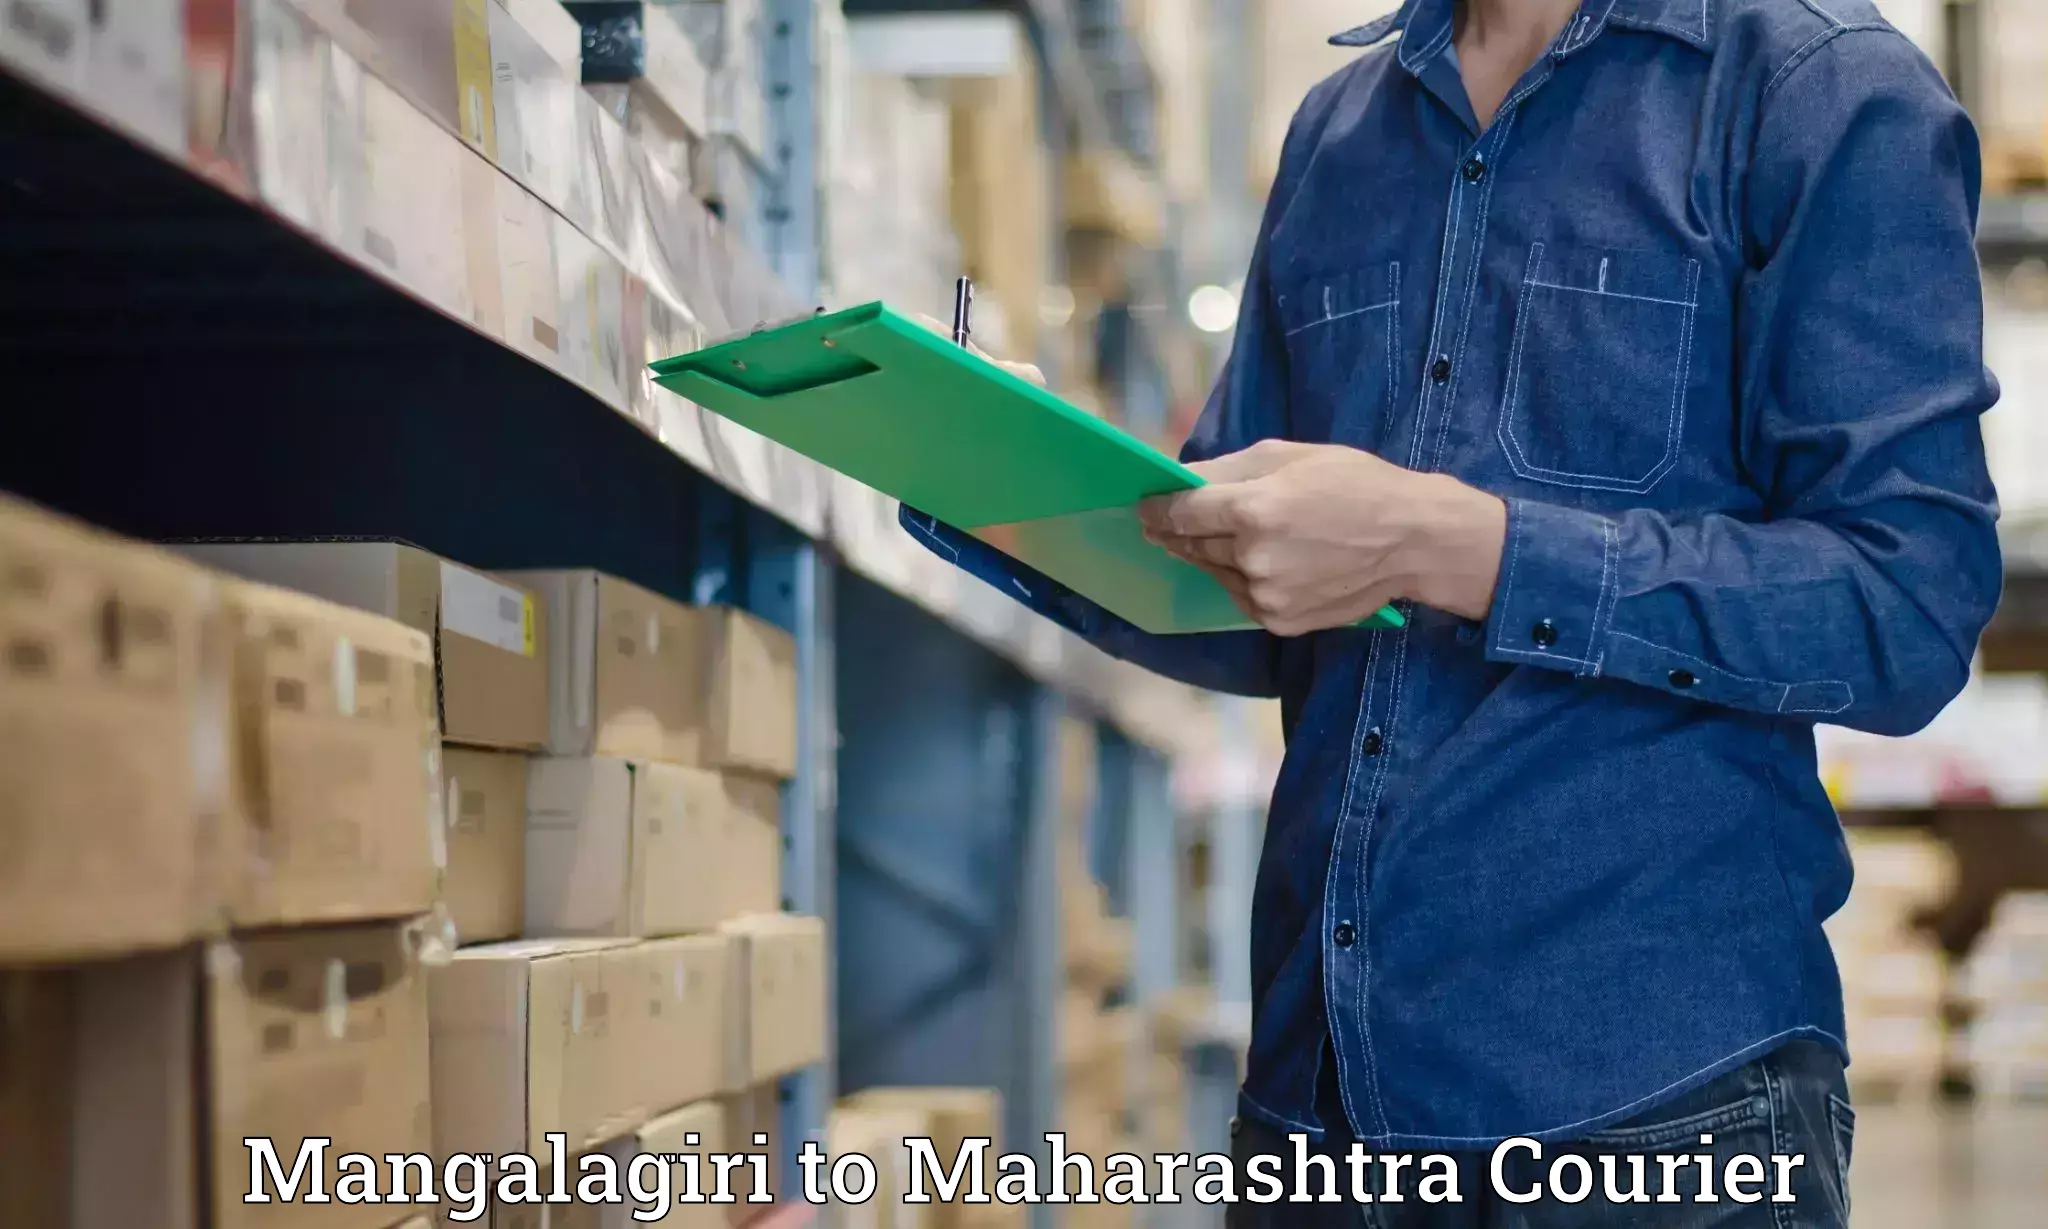 Reliable delivery network Mangalagiri to Tata Institute of Social Sciences Mumbai